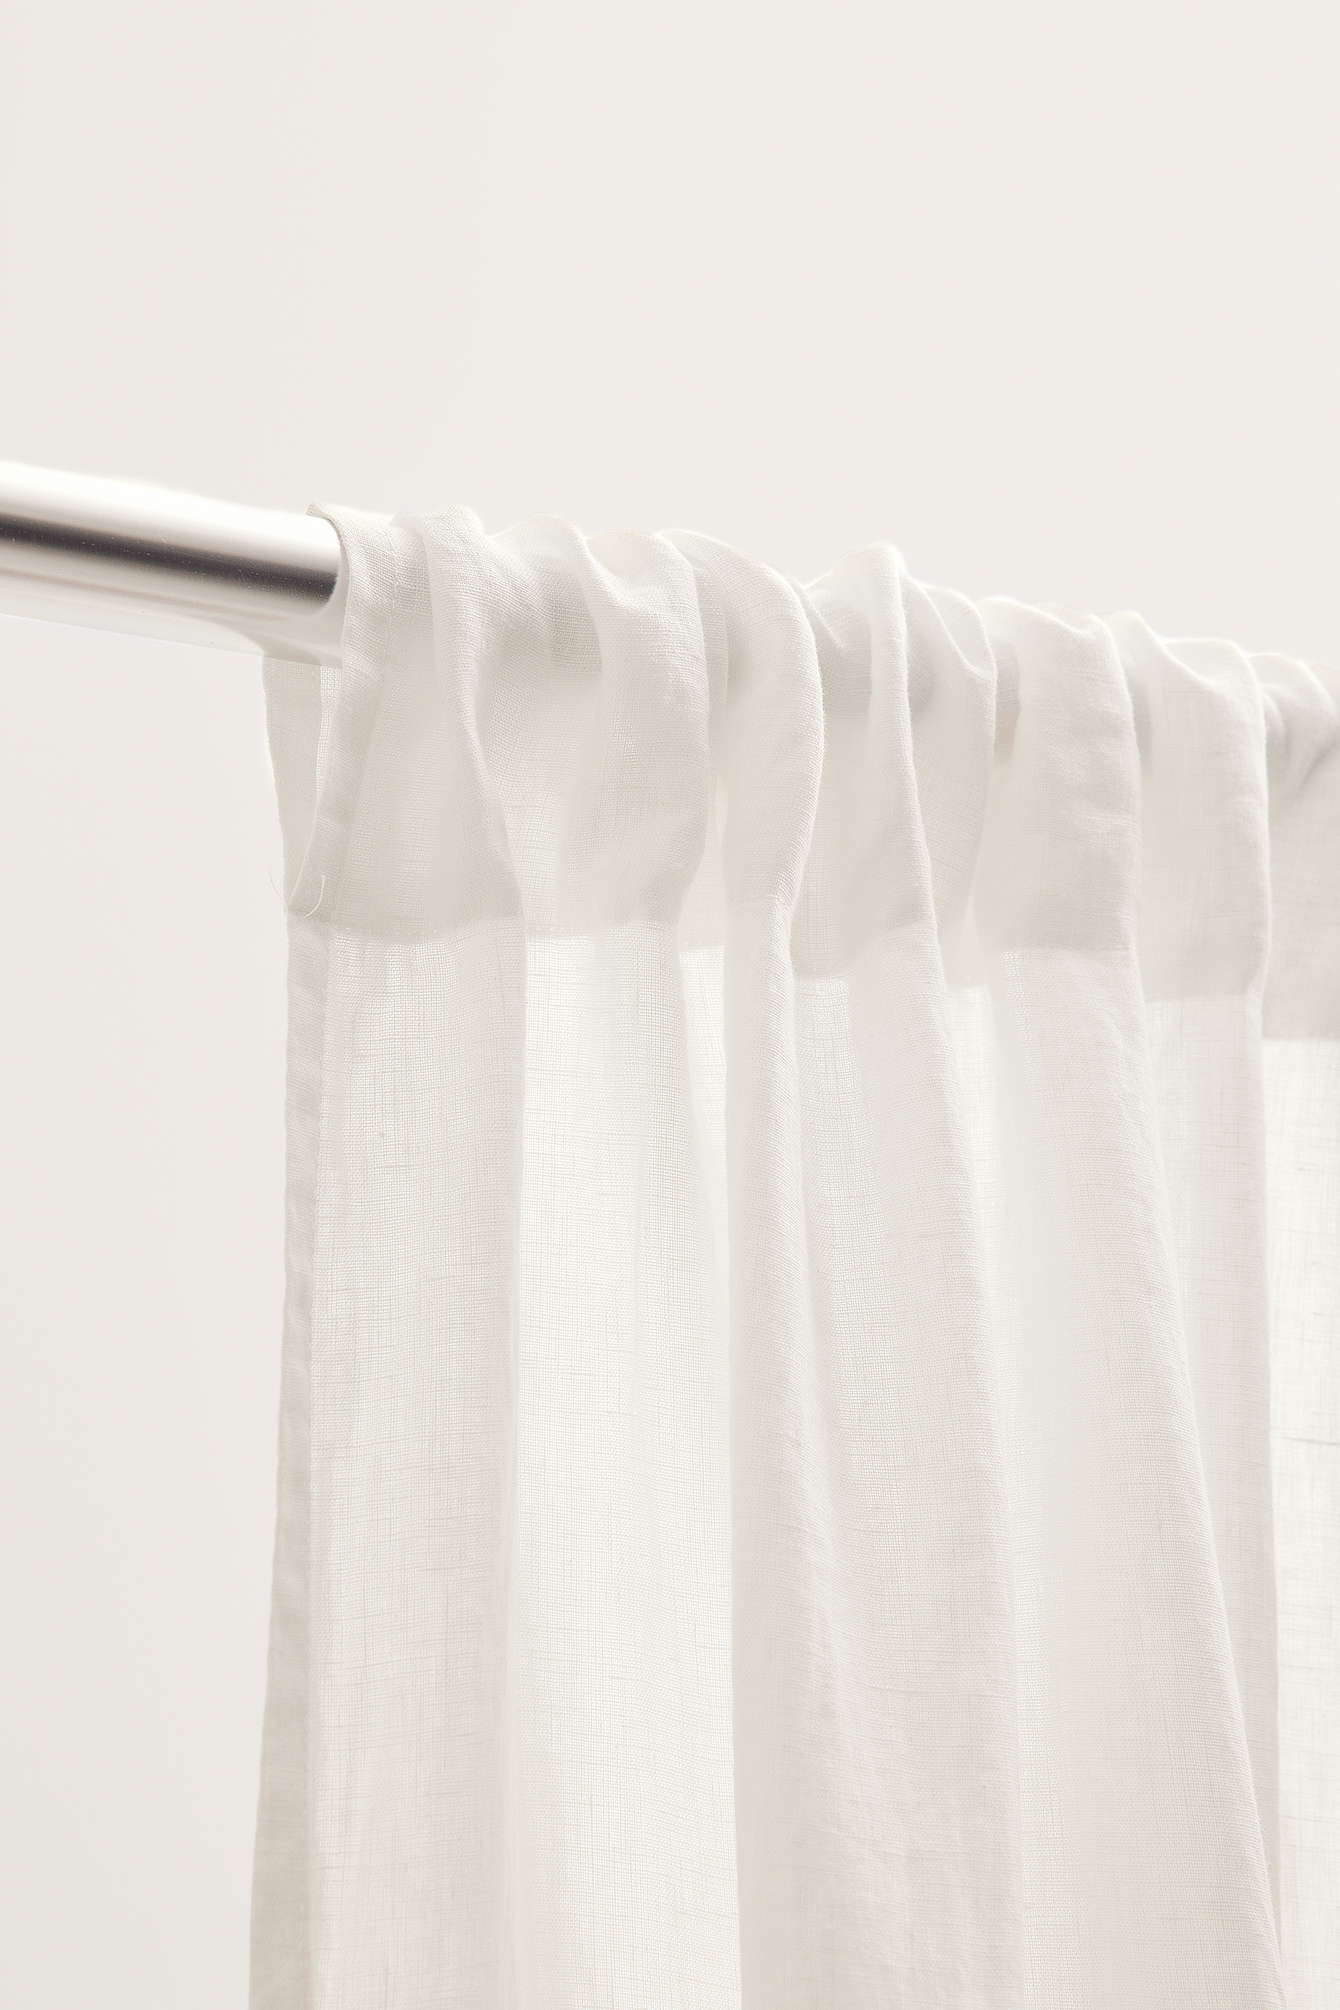 Linen Curtains 2-Pack White | na-kd.com